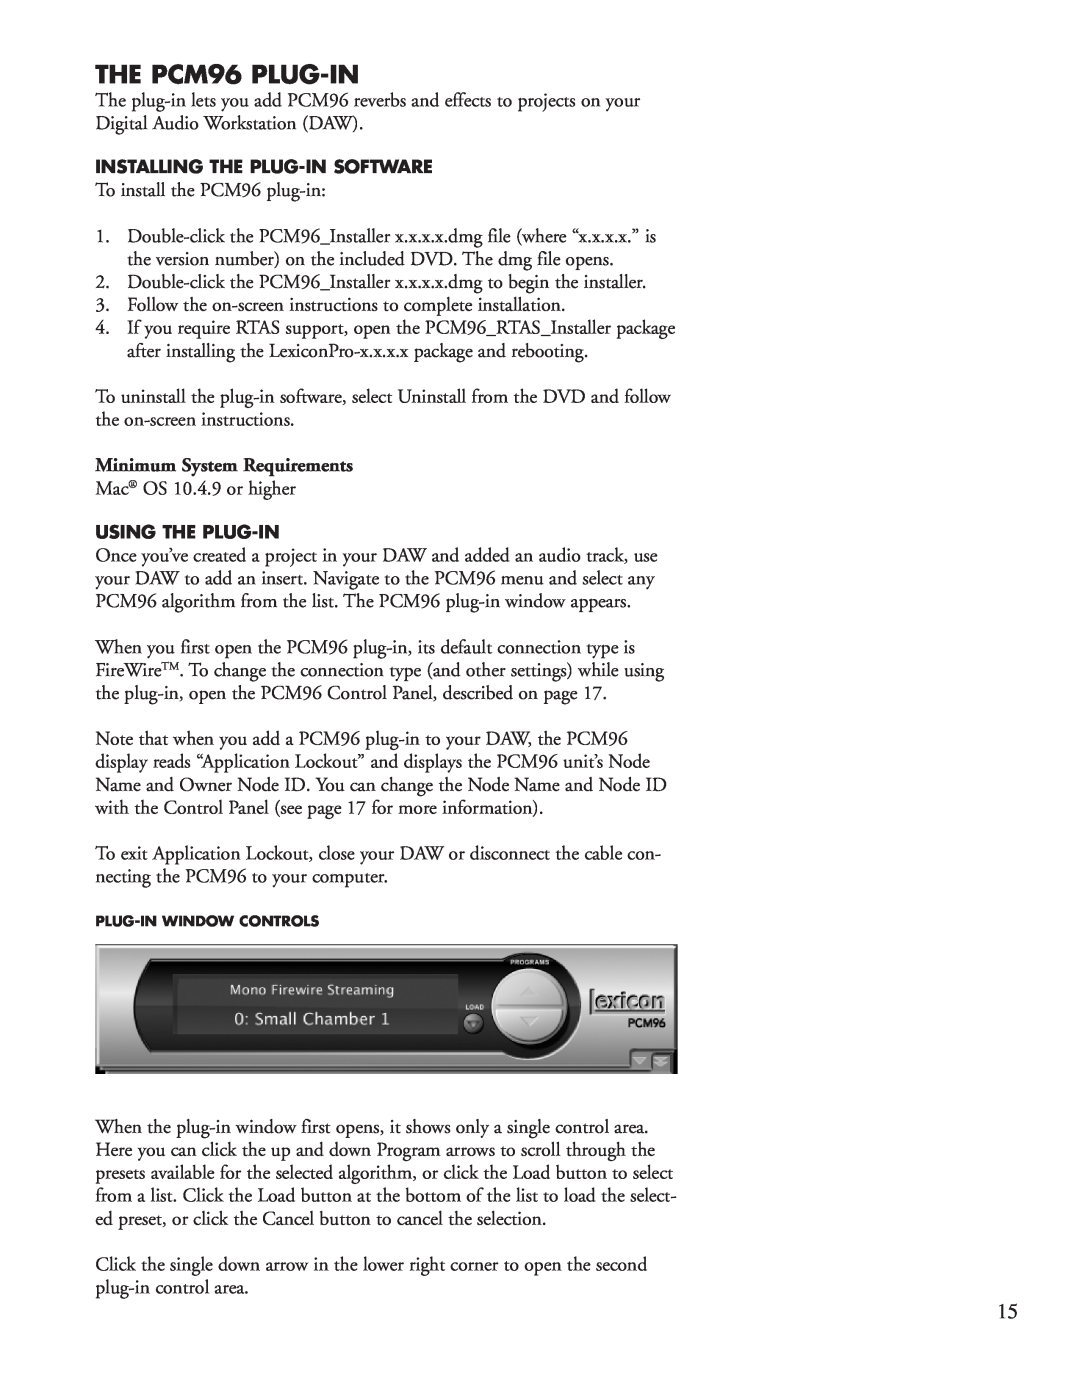 Lexicon manual The PCM96 Plug-IN, Minimum System Requirements 